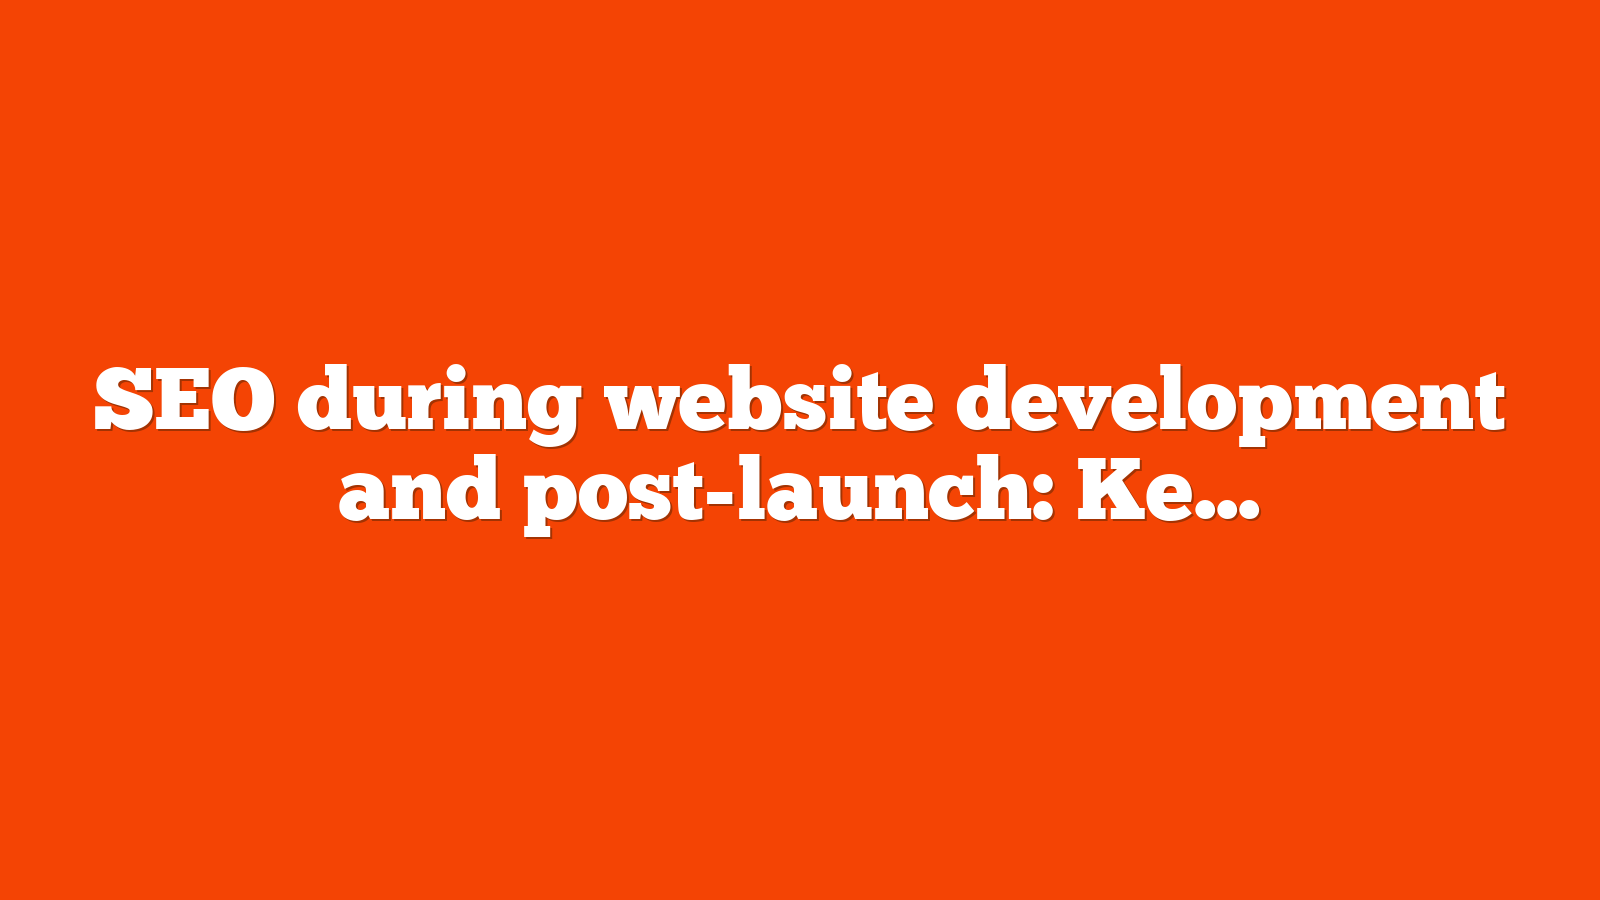 SEO during website development and post-launch: Key considerations